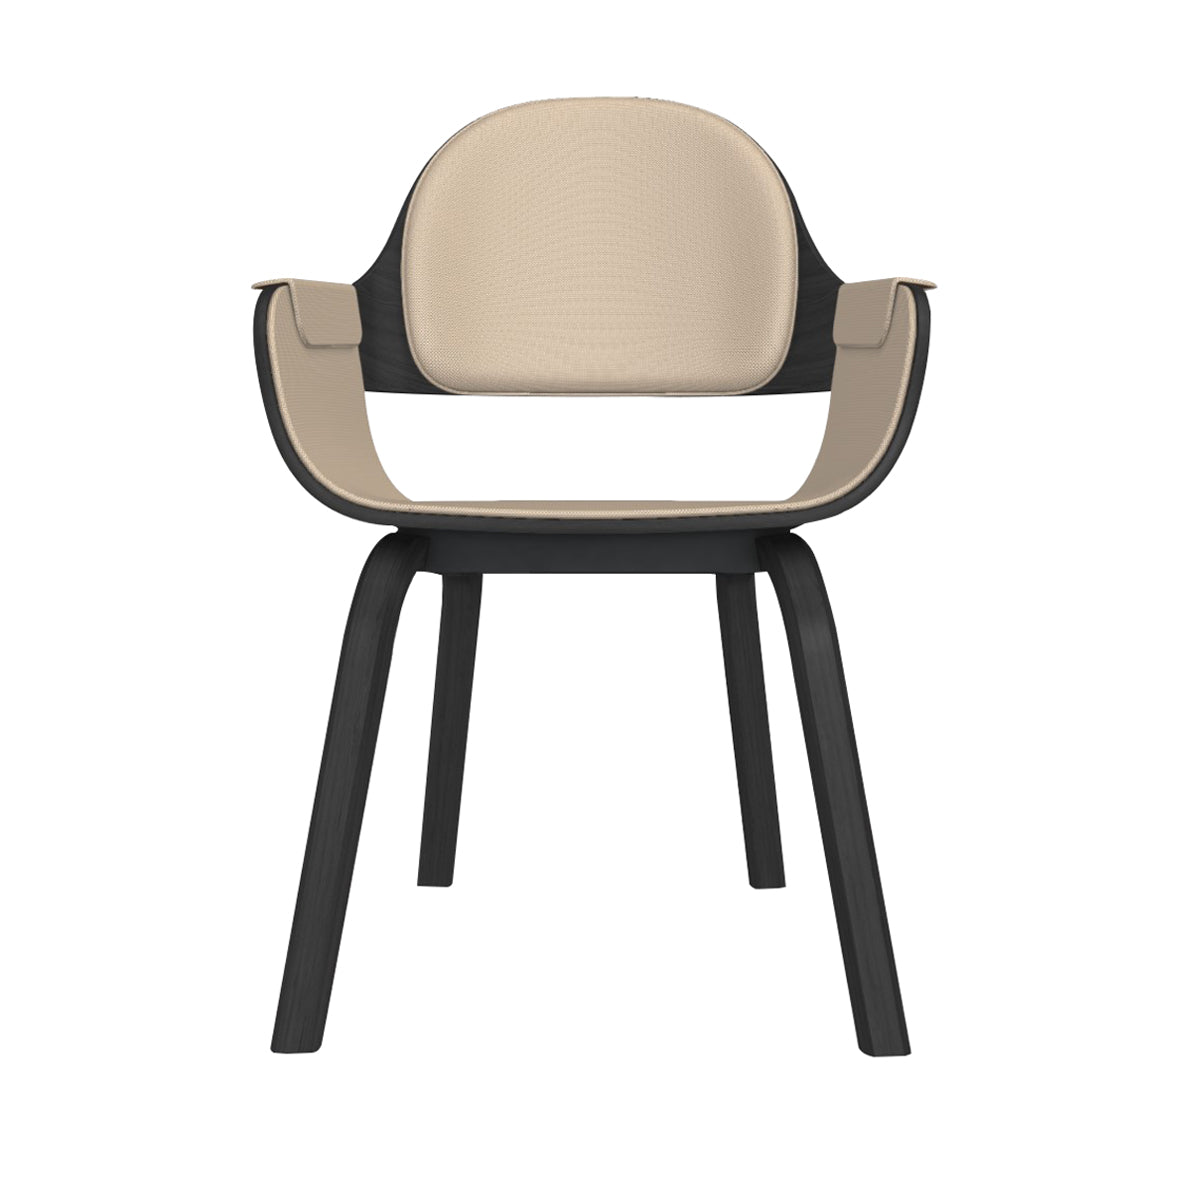 Showtime Nude Chair: Interior Seat + Armrest + Backrest Cushion + Ash Stained Black